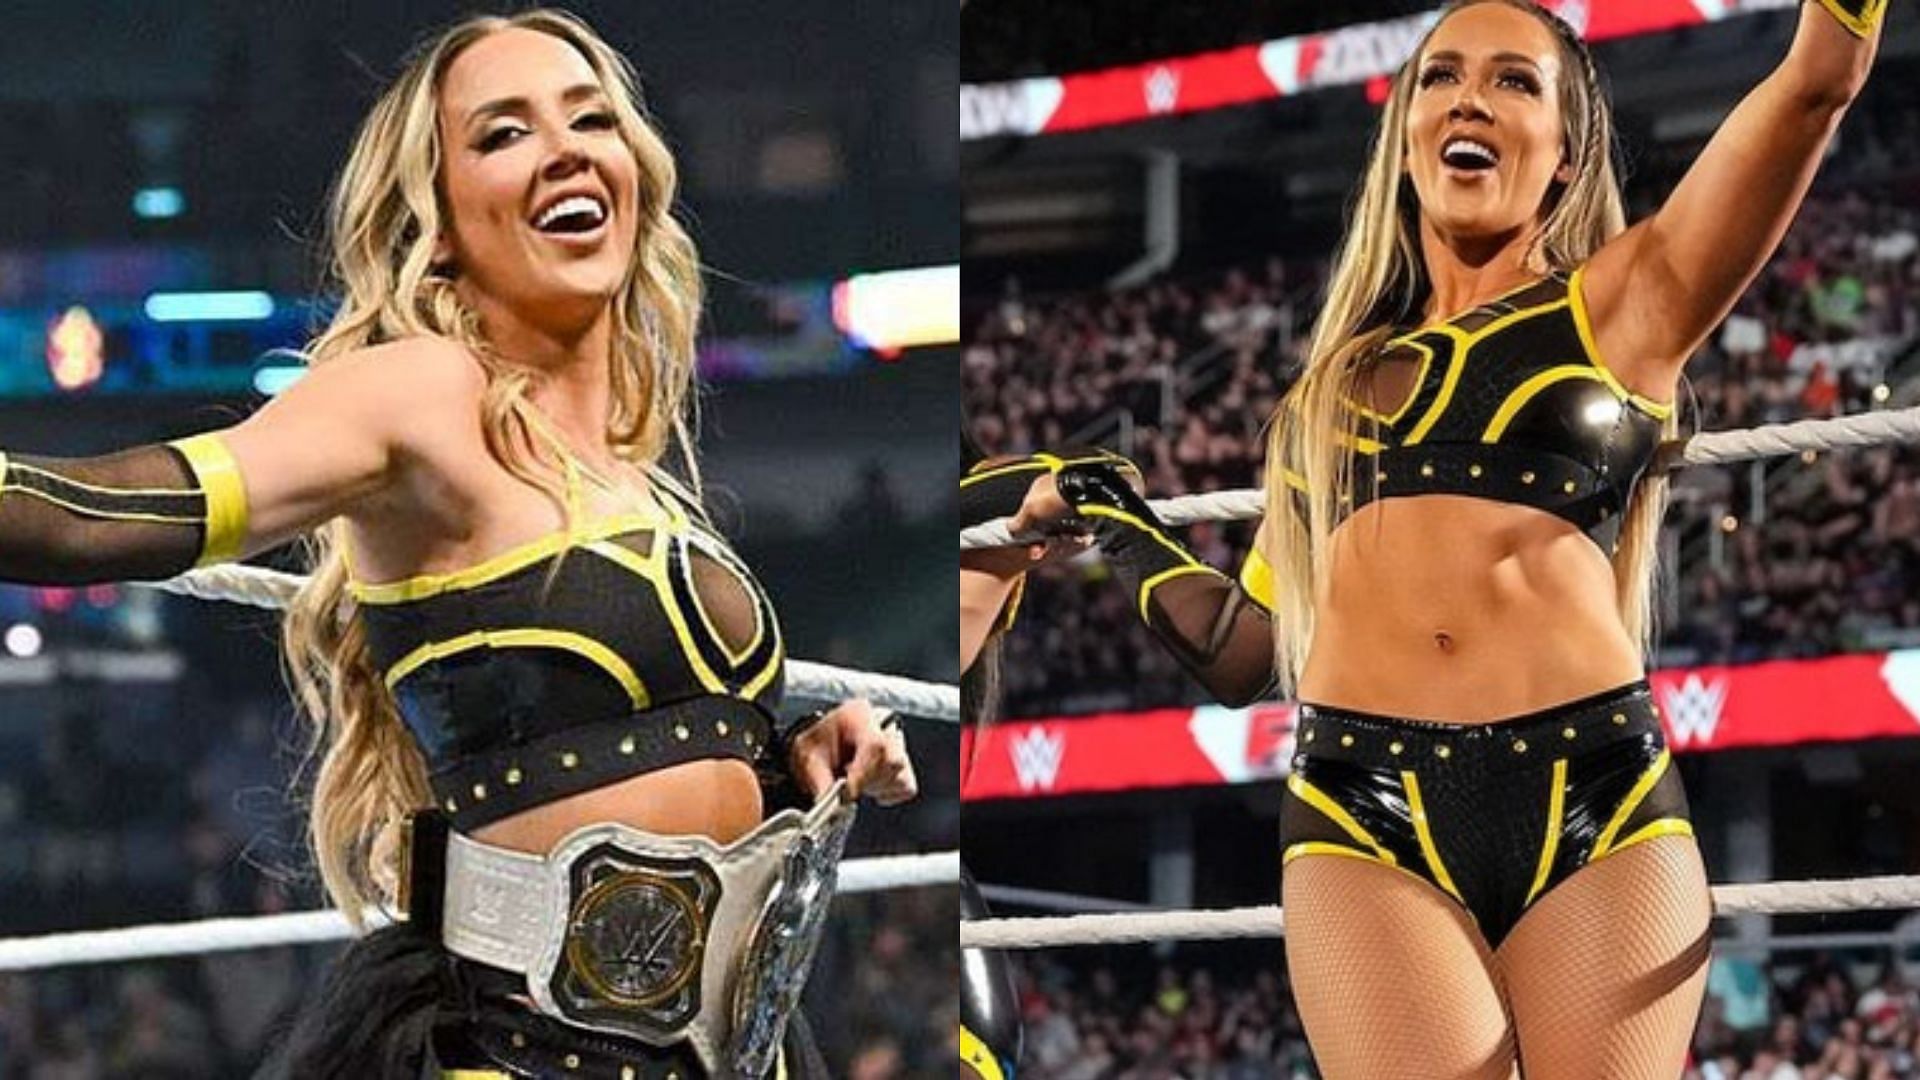 WWE Superstar Chelsea Green reacts to having a new partner after a champion is crowned